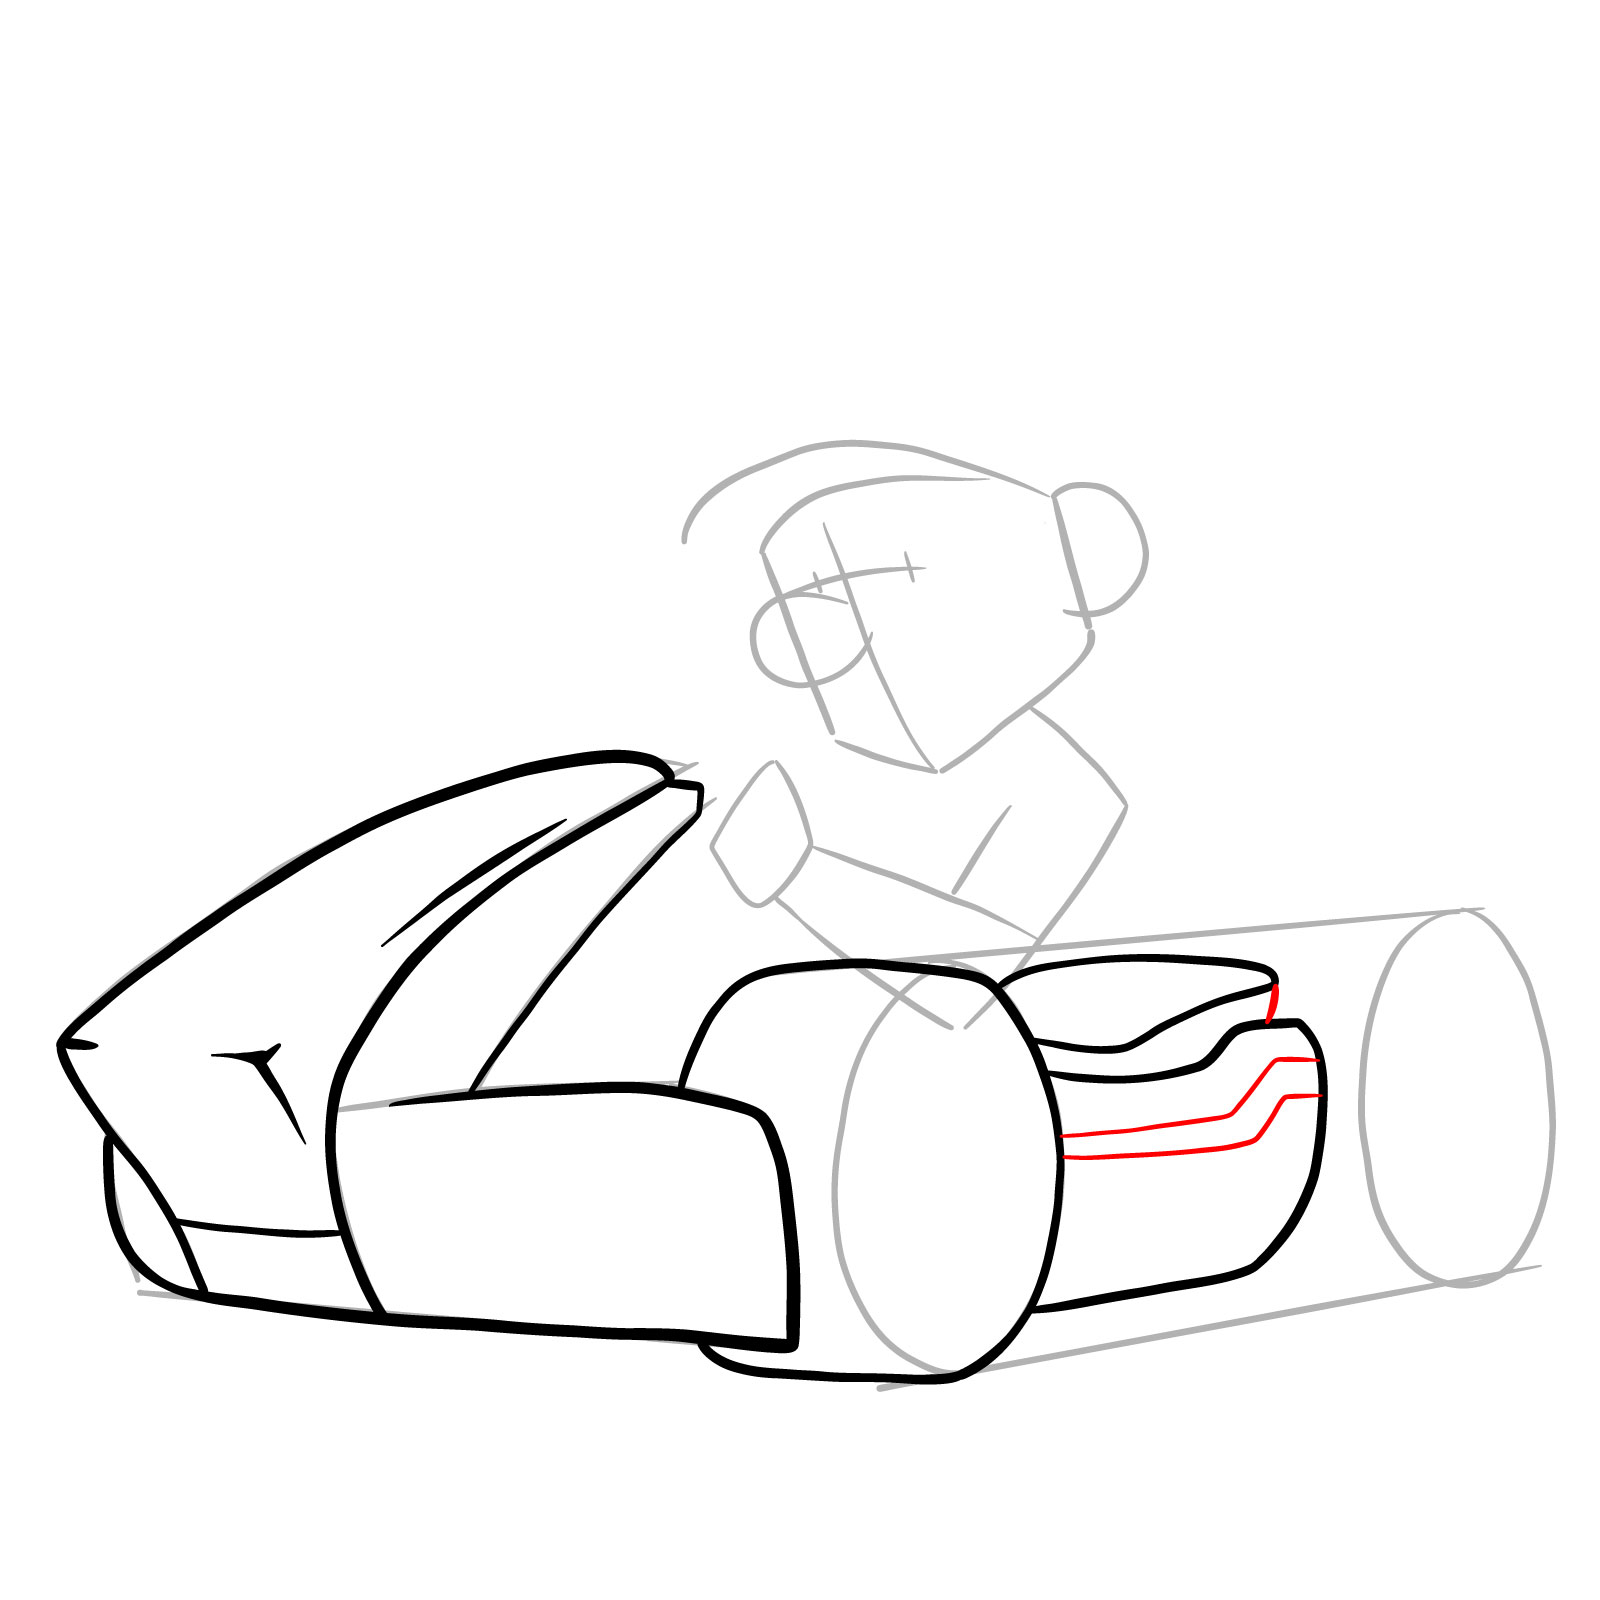 How to draw Race Traitors Mario - step 11